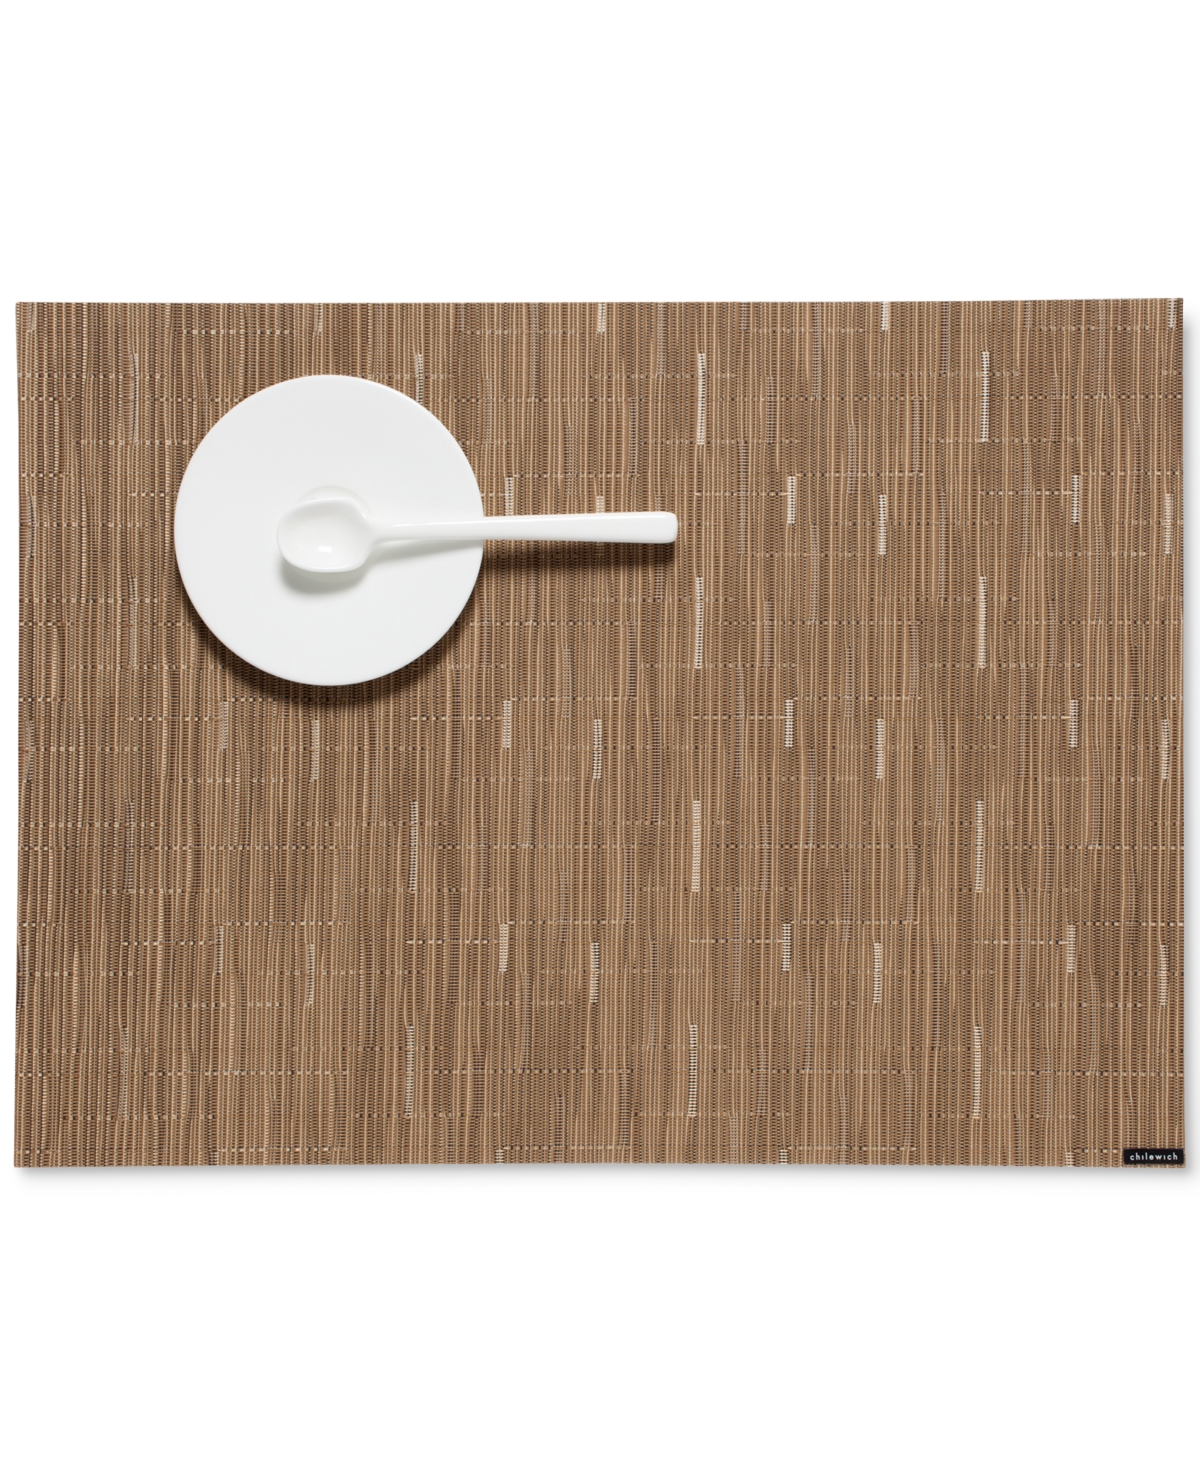 Chilewich Bamboo Woven Vinyl Placemat 14 x 19